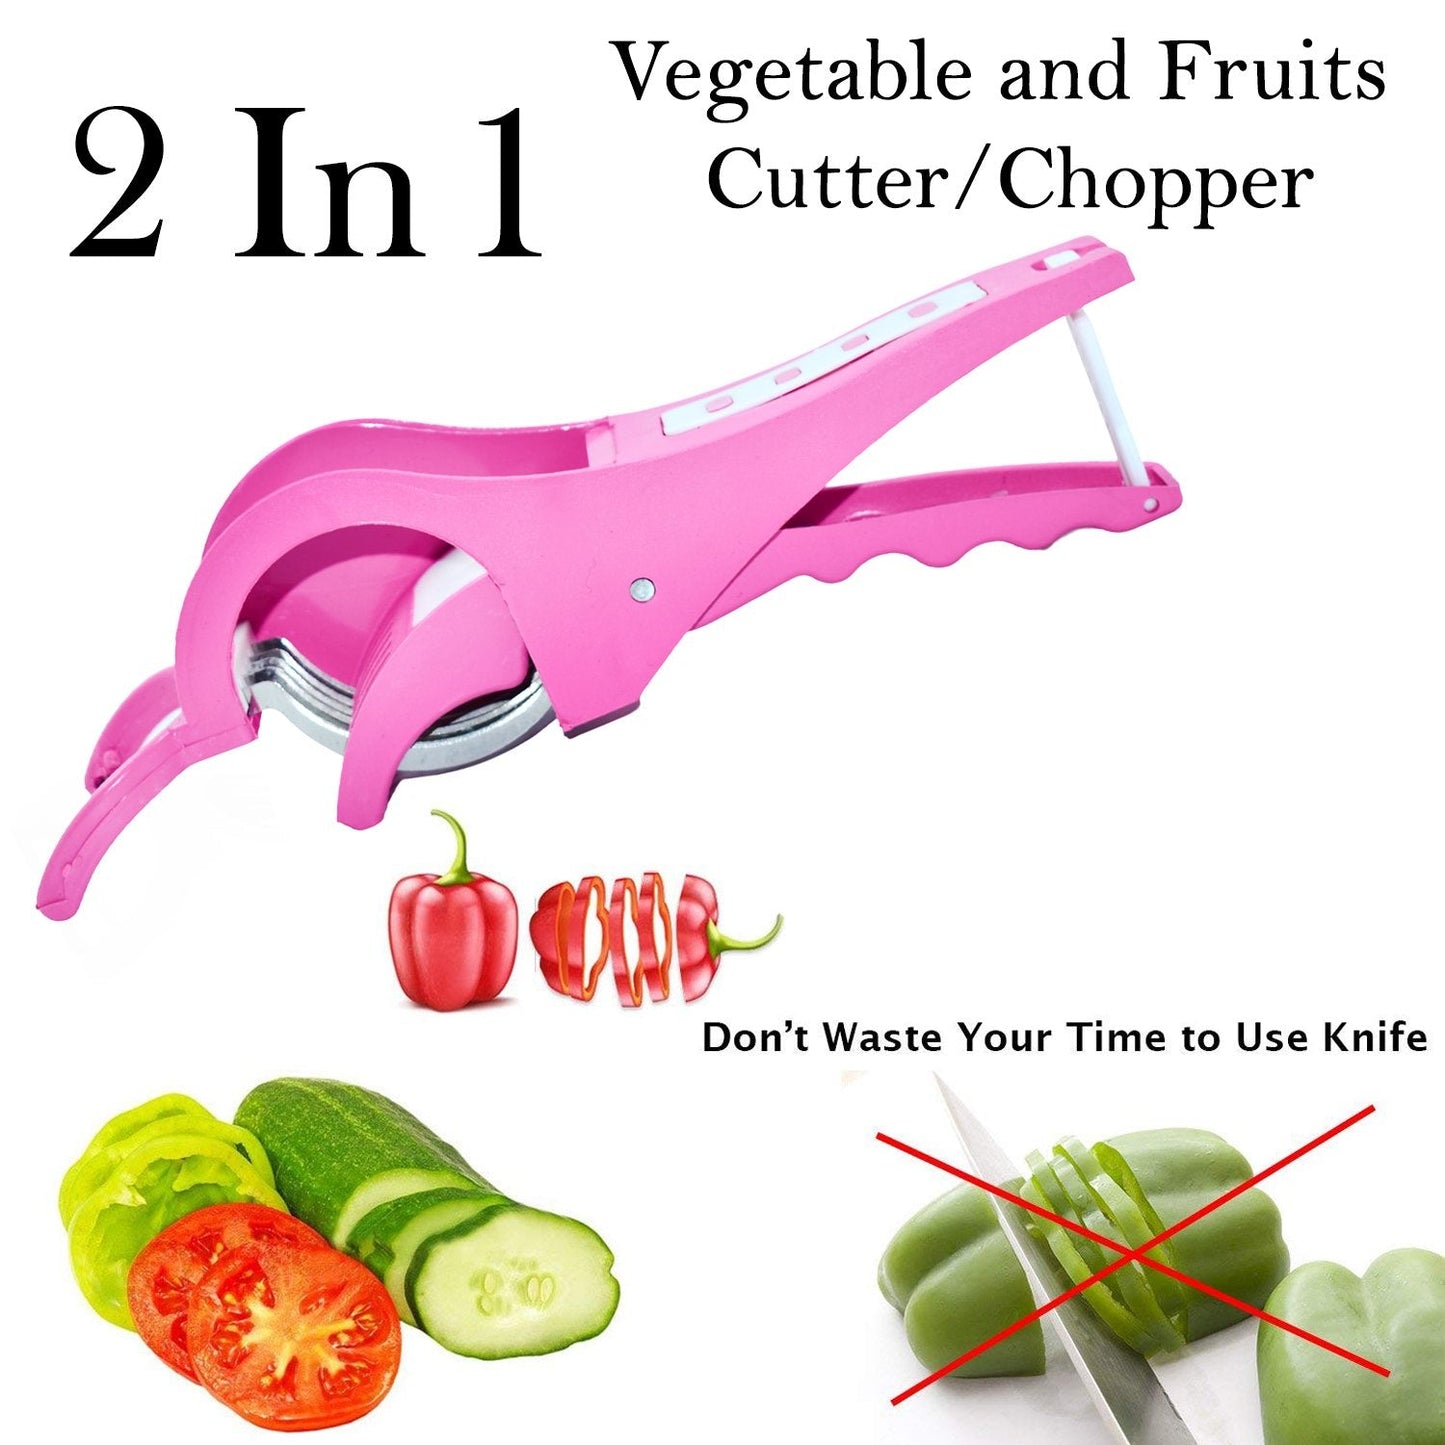 2In1 Veg Cutter Used To Cut Vegetables